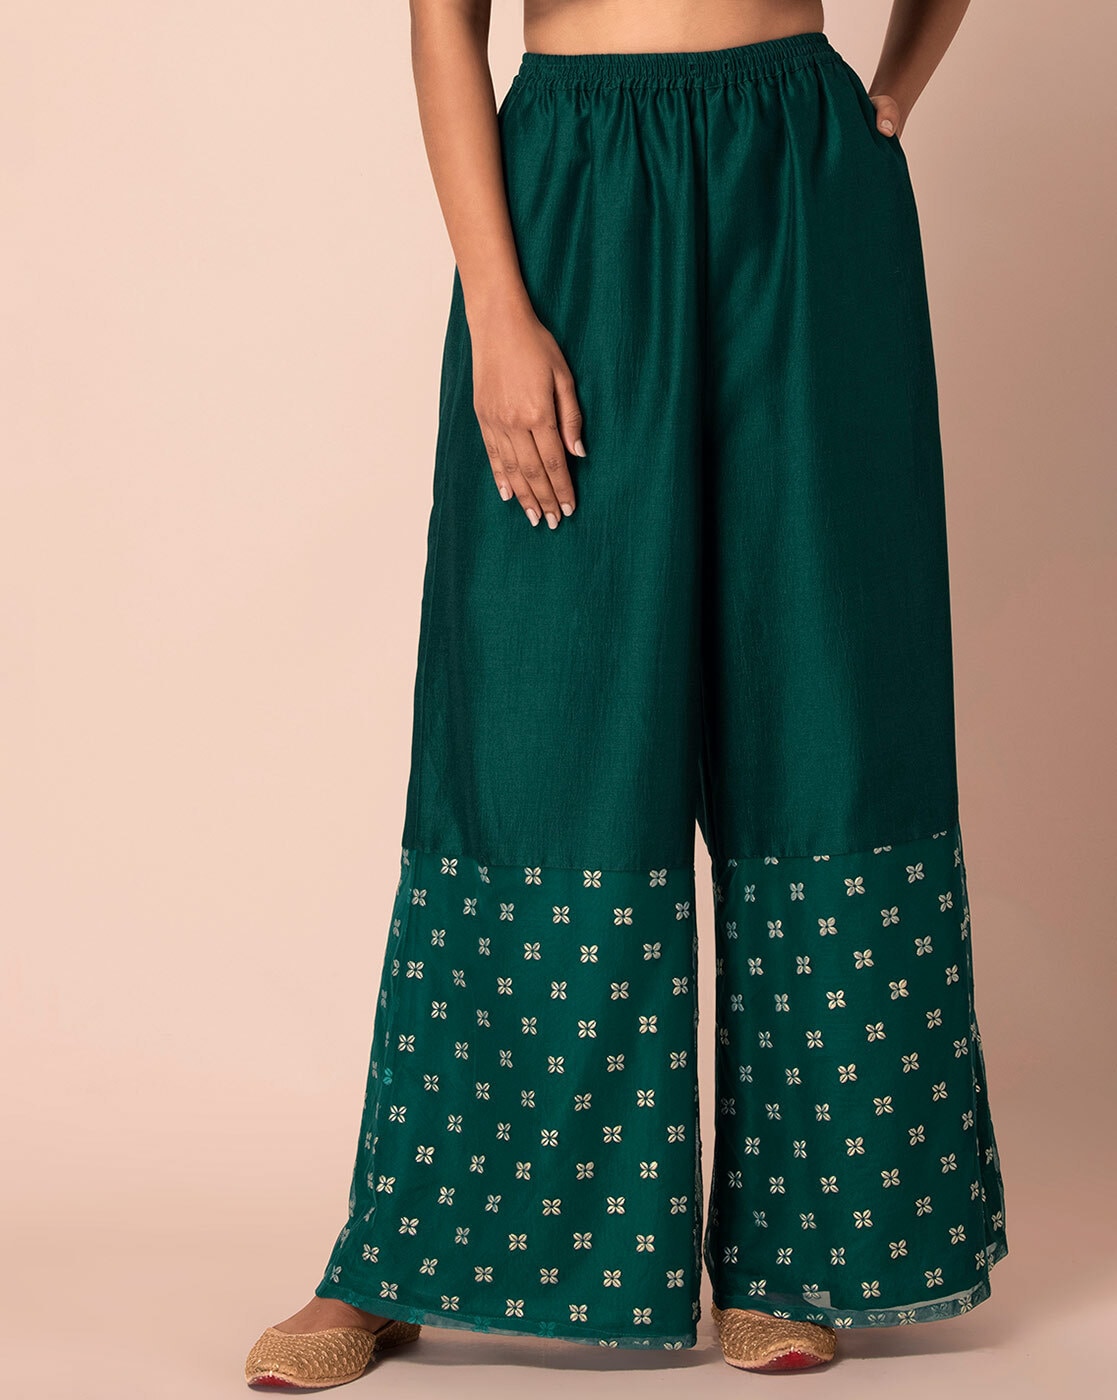 Display 137+ palazzo pants for women best